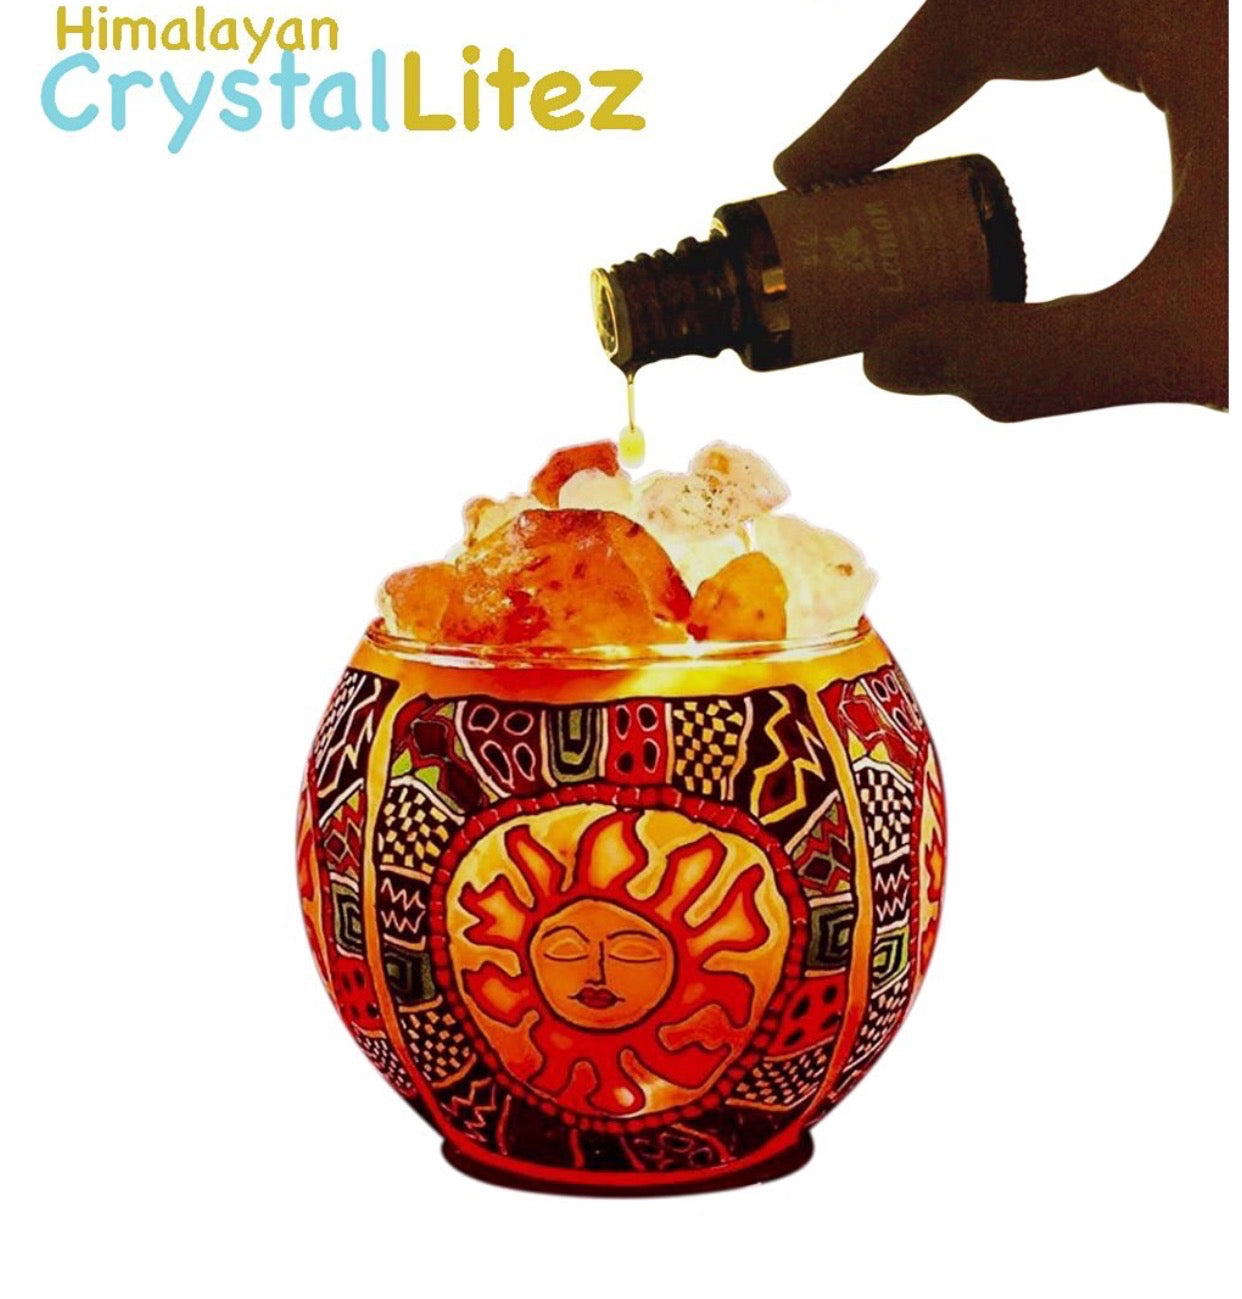 with Dimmer Co Salt Himalayan UL – Lamp Aromatherapy Listed CrystalLitez